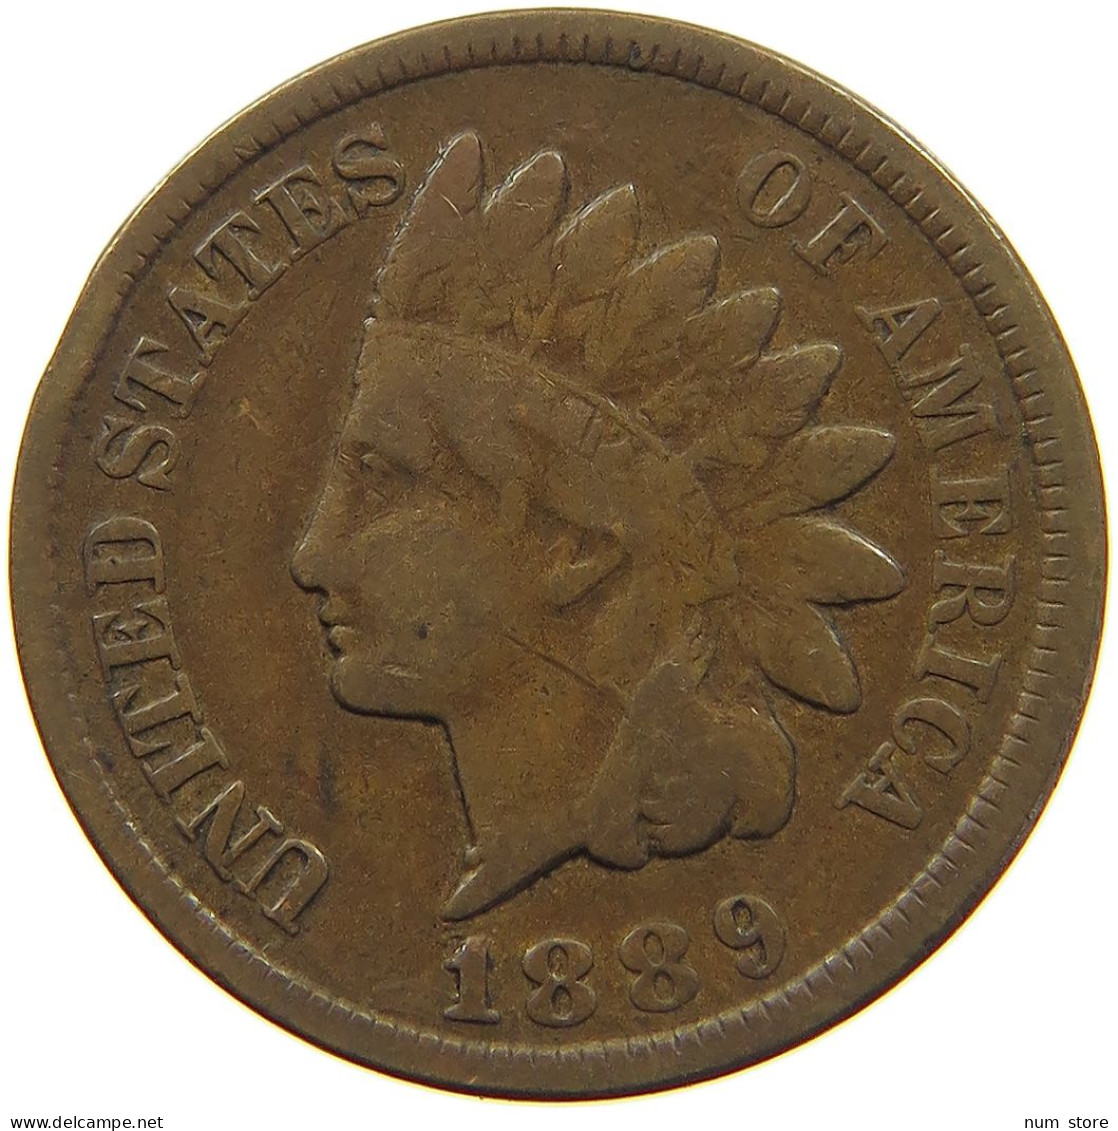 UNITED STATES OF AMERICA CENT 1889 INDIAN HEAD #c083 0653 - 1859-1909: Indian Head